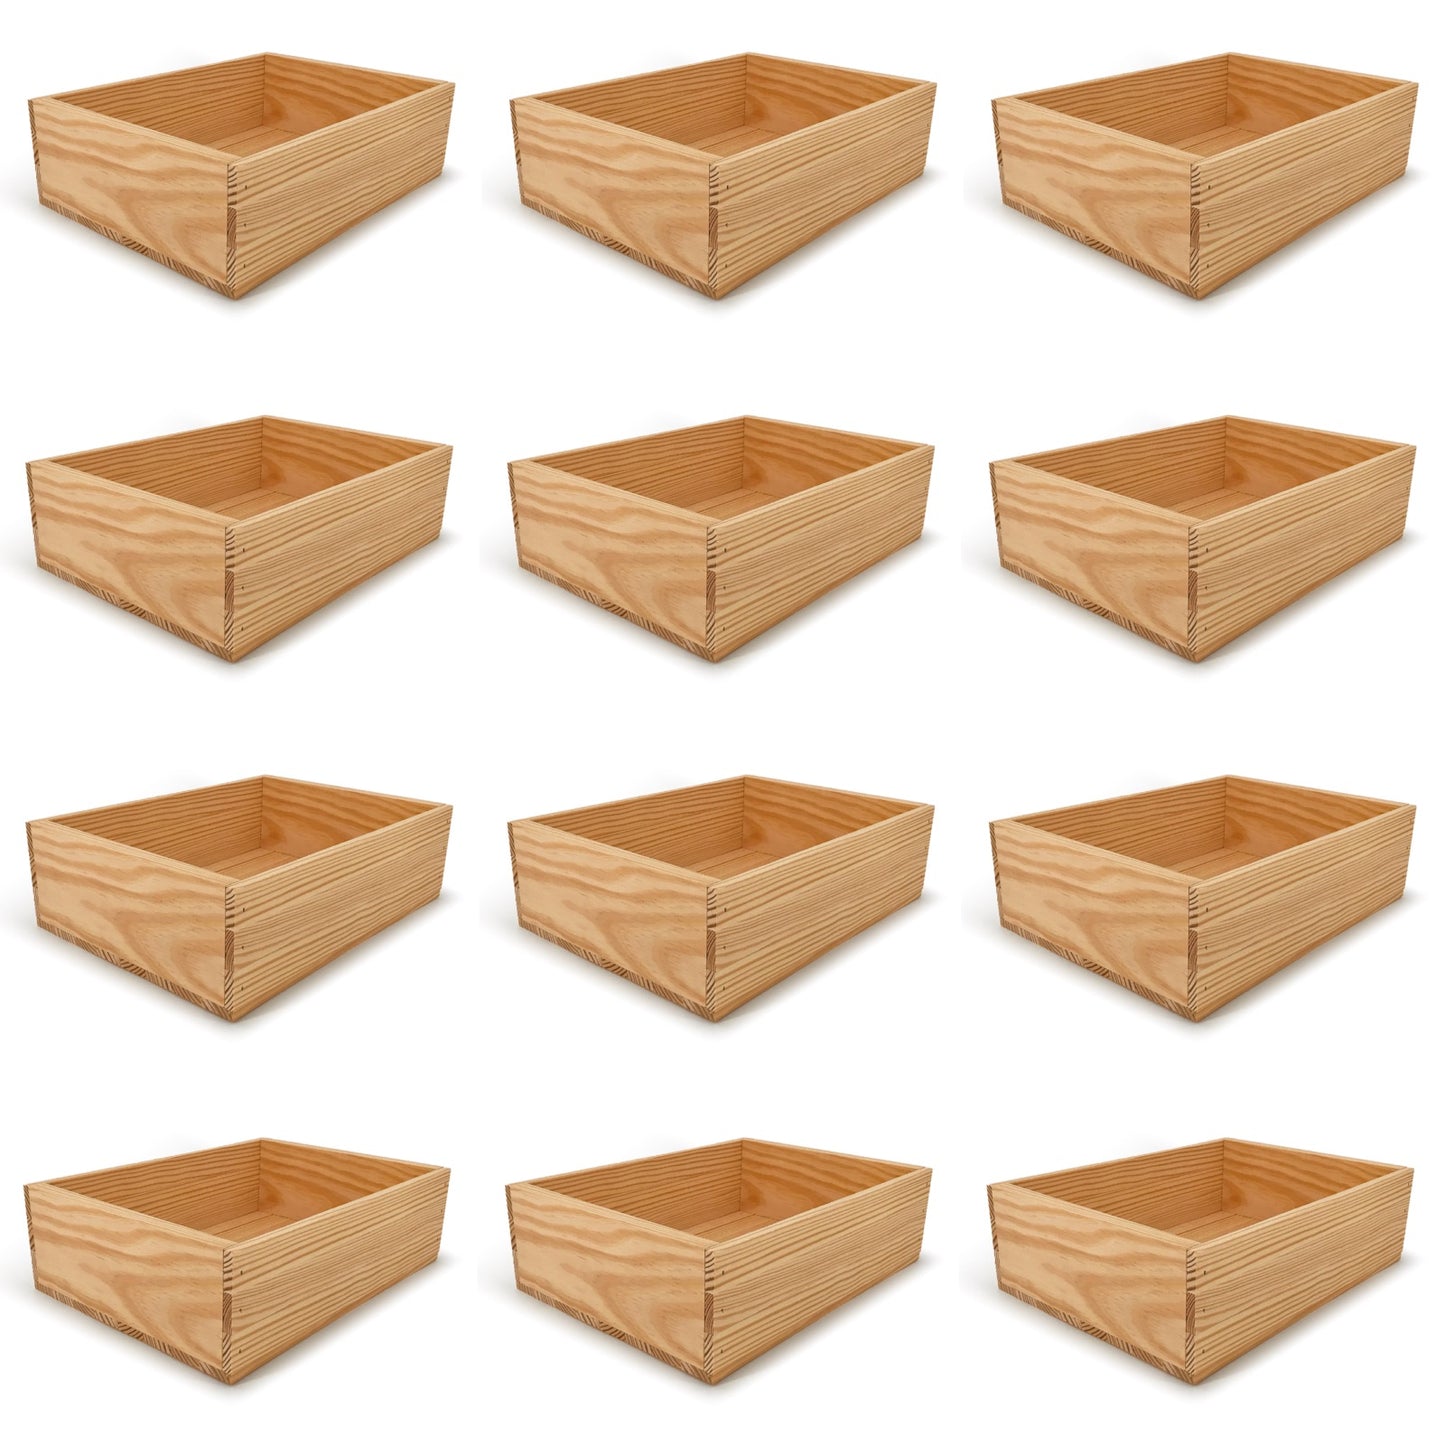 12 Small wooden crates 14x10x4.25